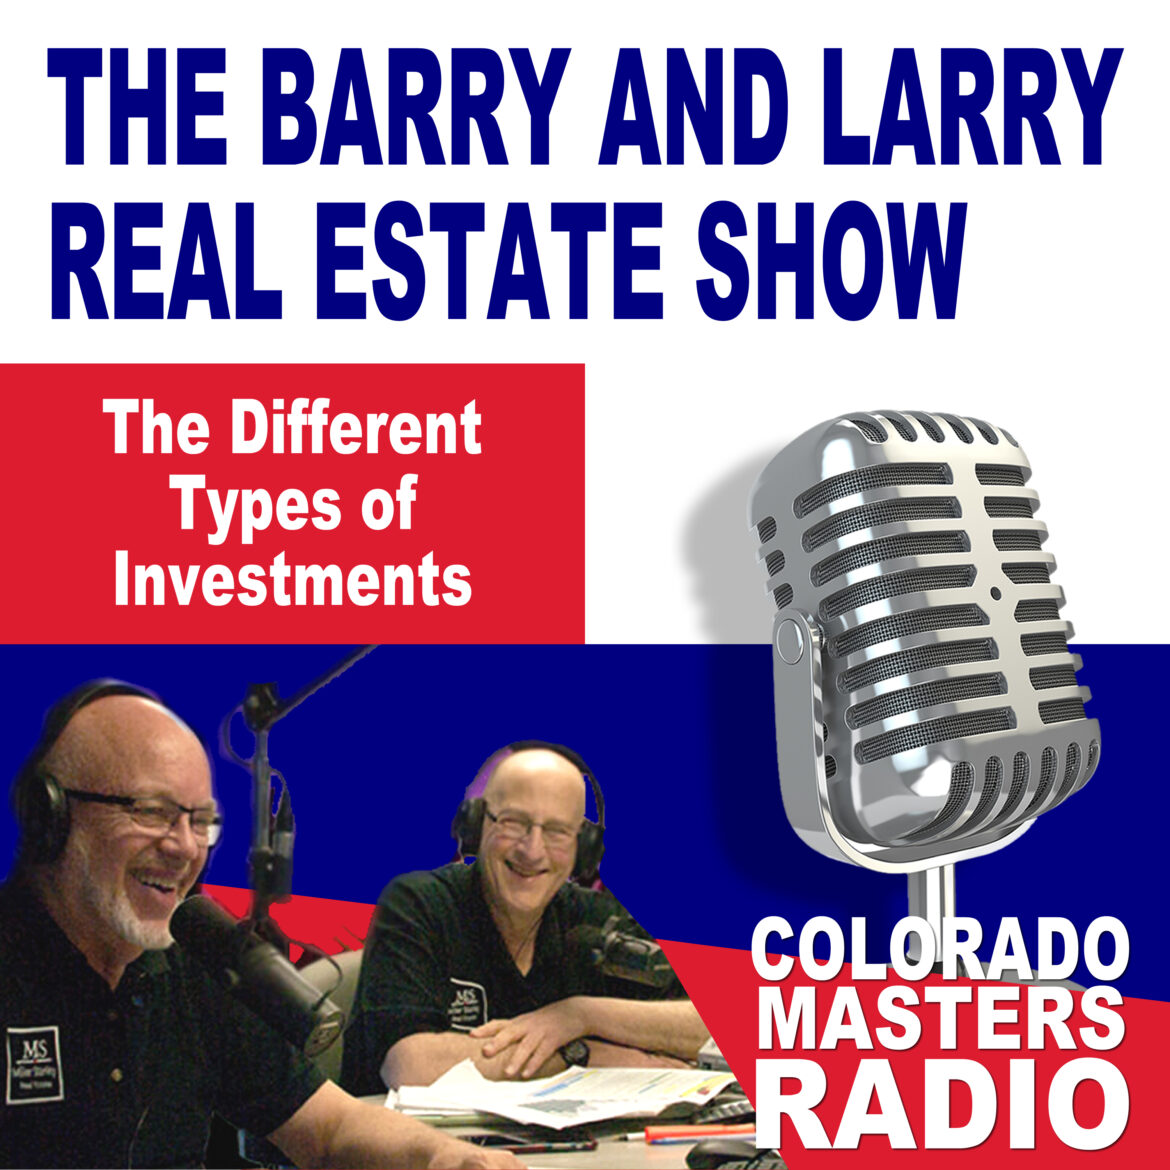 The Larry and Barry Real Estate Show - The Different Types of Investments